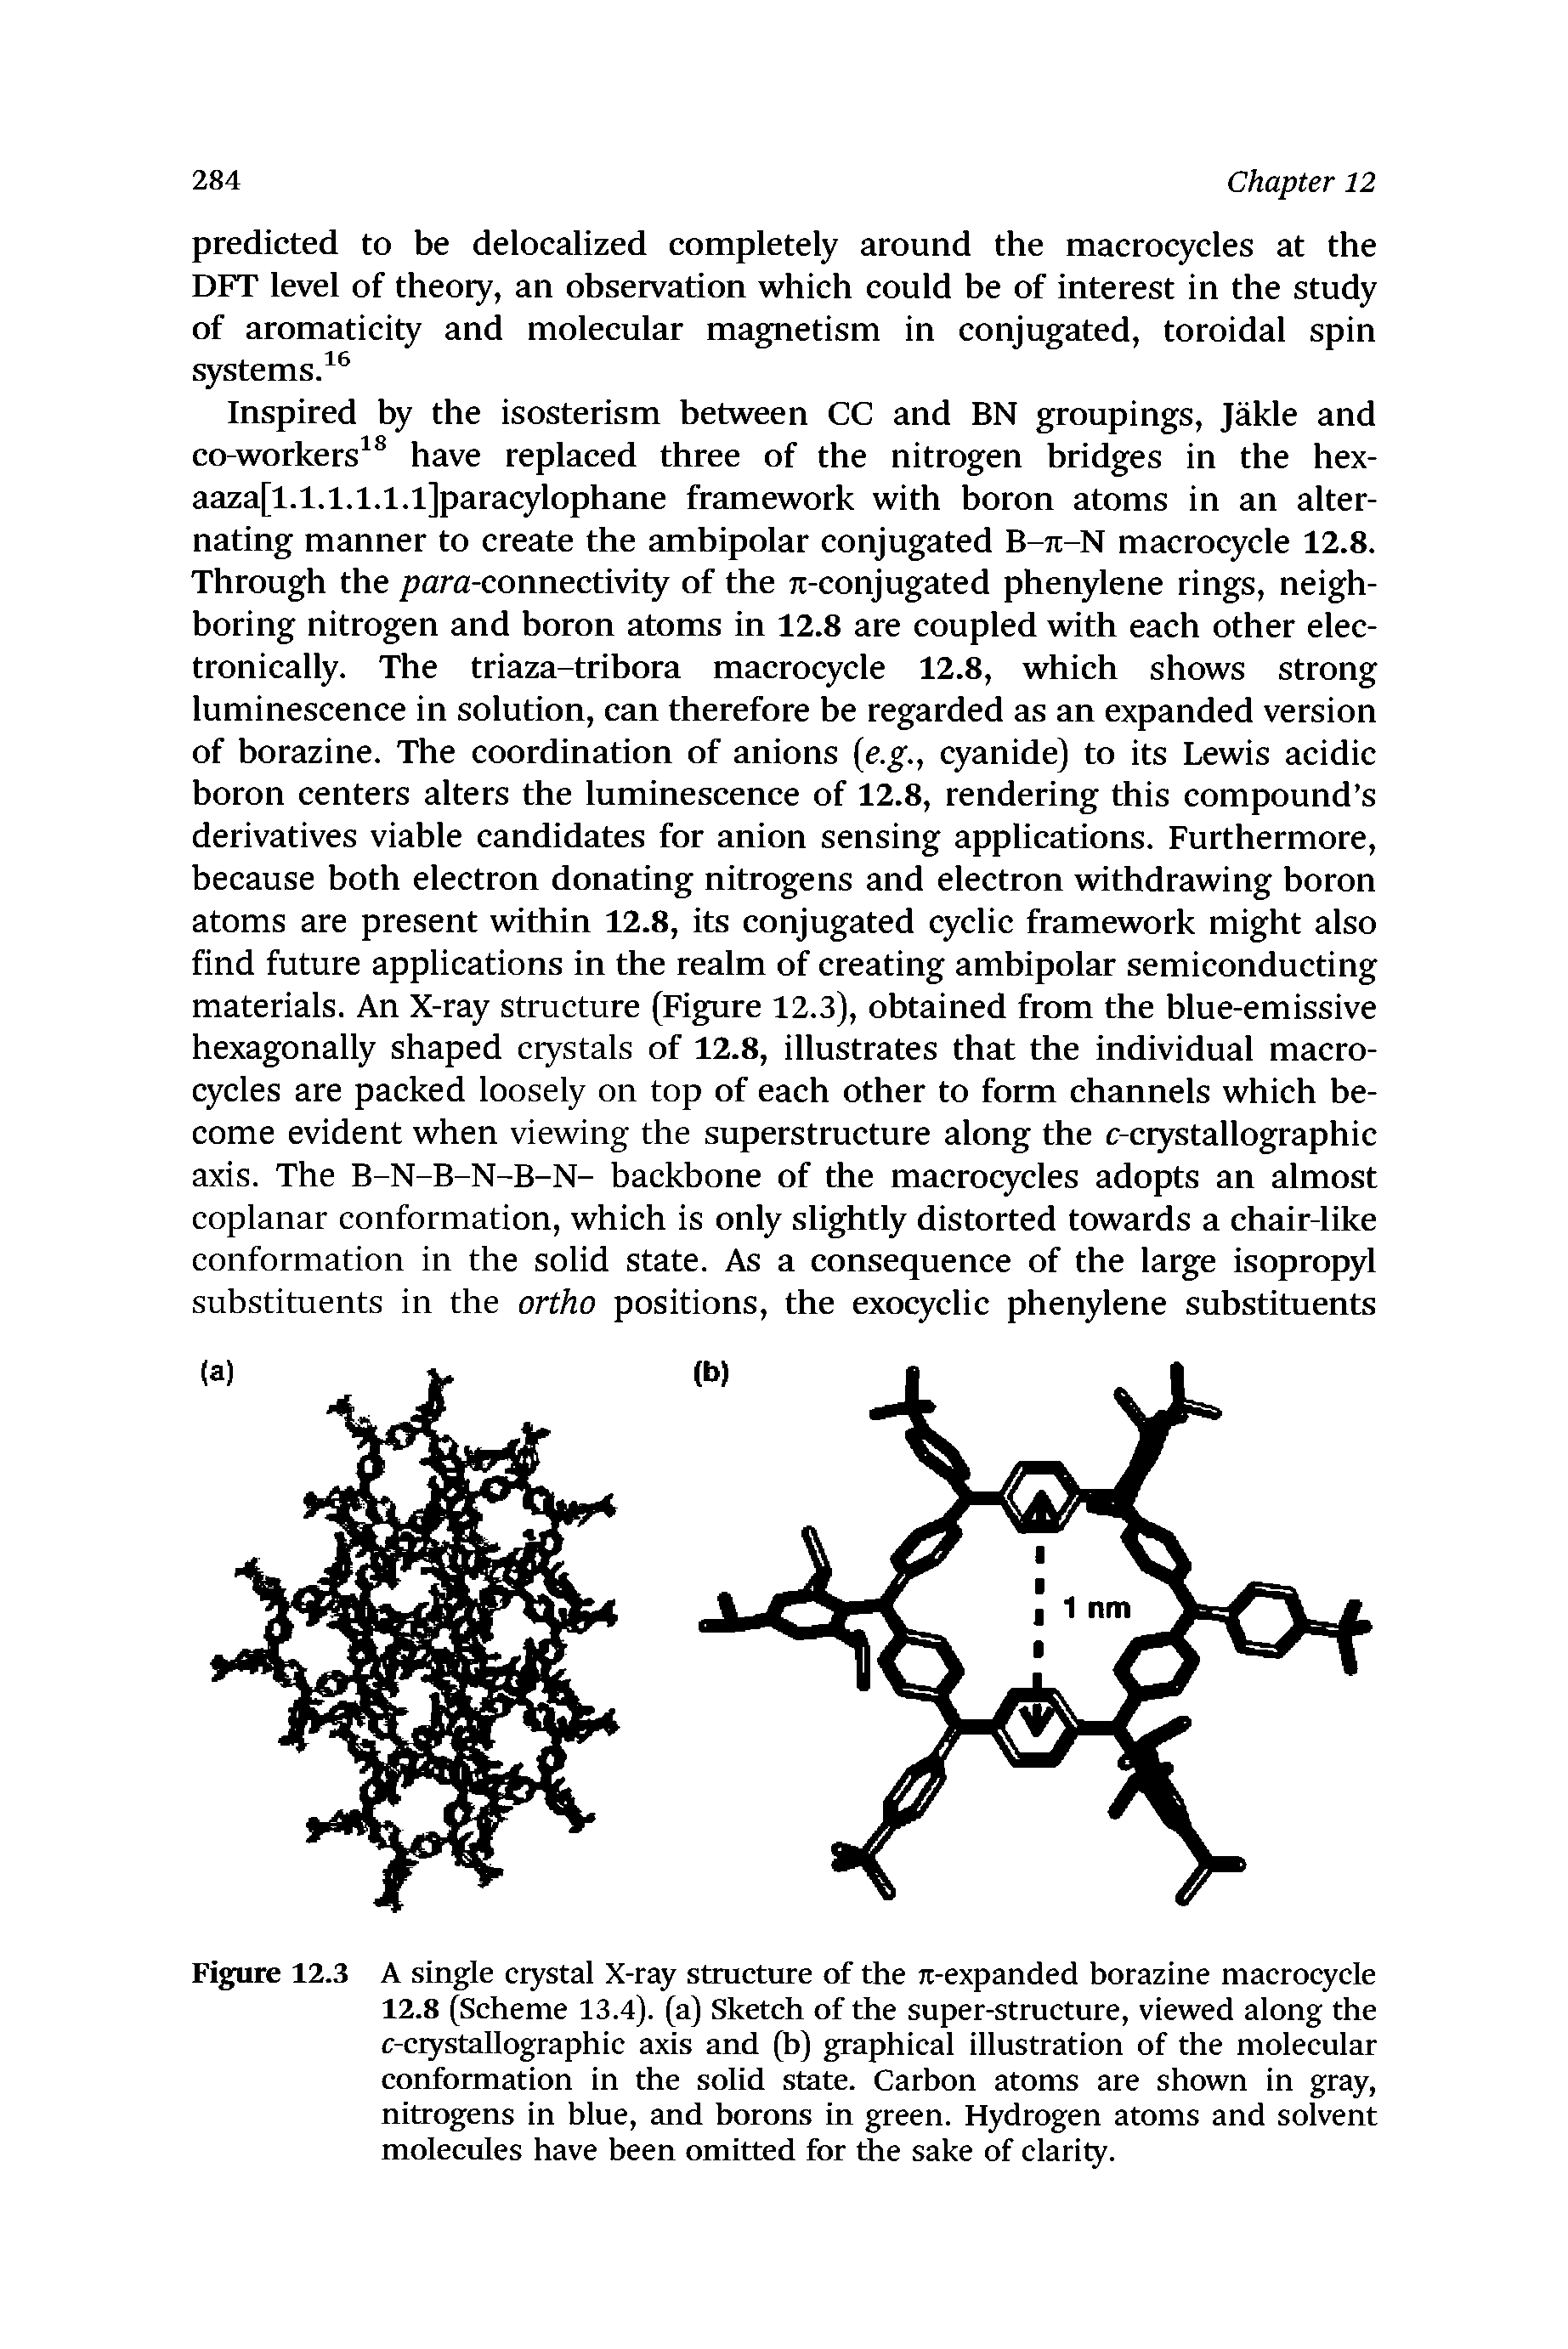 Figure 12.3 A single crystal X-ray stmcture of the Jt-expanded borazine macrocycle 12.8 (Scheme 13.4). (a) Sketch of the super-structure, viewed along the c-crystallographic axis and (b) graphical illustration of the molecular conformation in the solid state. Carbon atoms are shown in gray, nitrogens in blue, and borons in green. Hydrogen atoms and solvent molecules have been omitted for the sake of clarity.